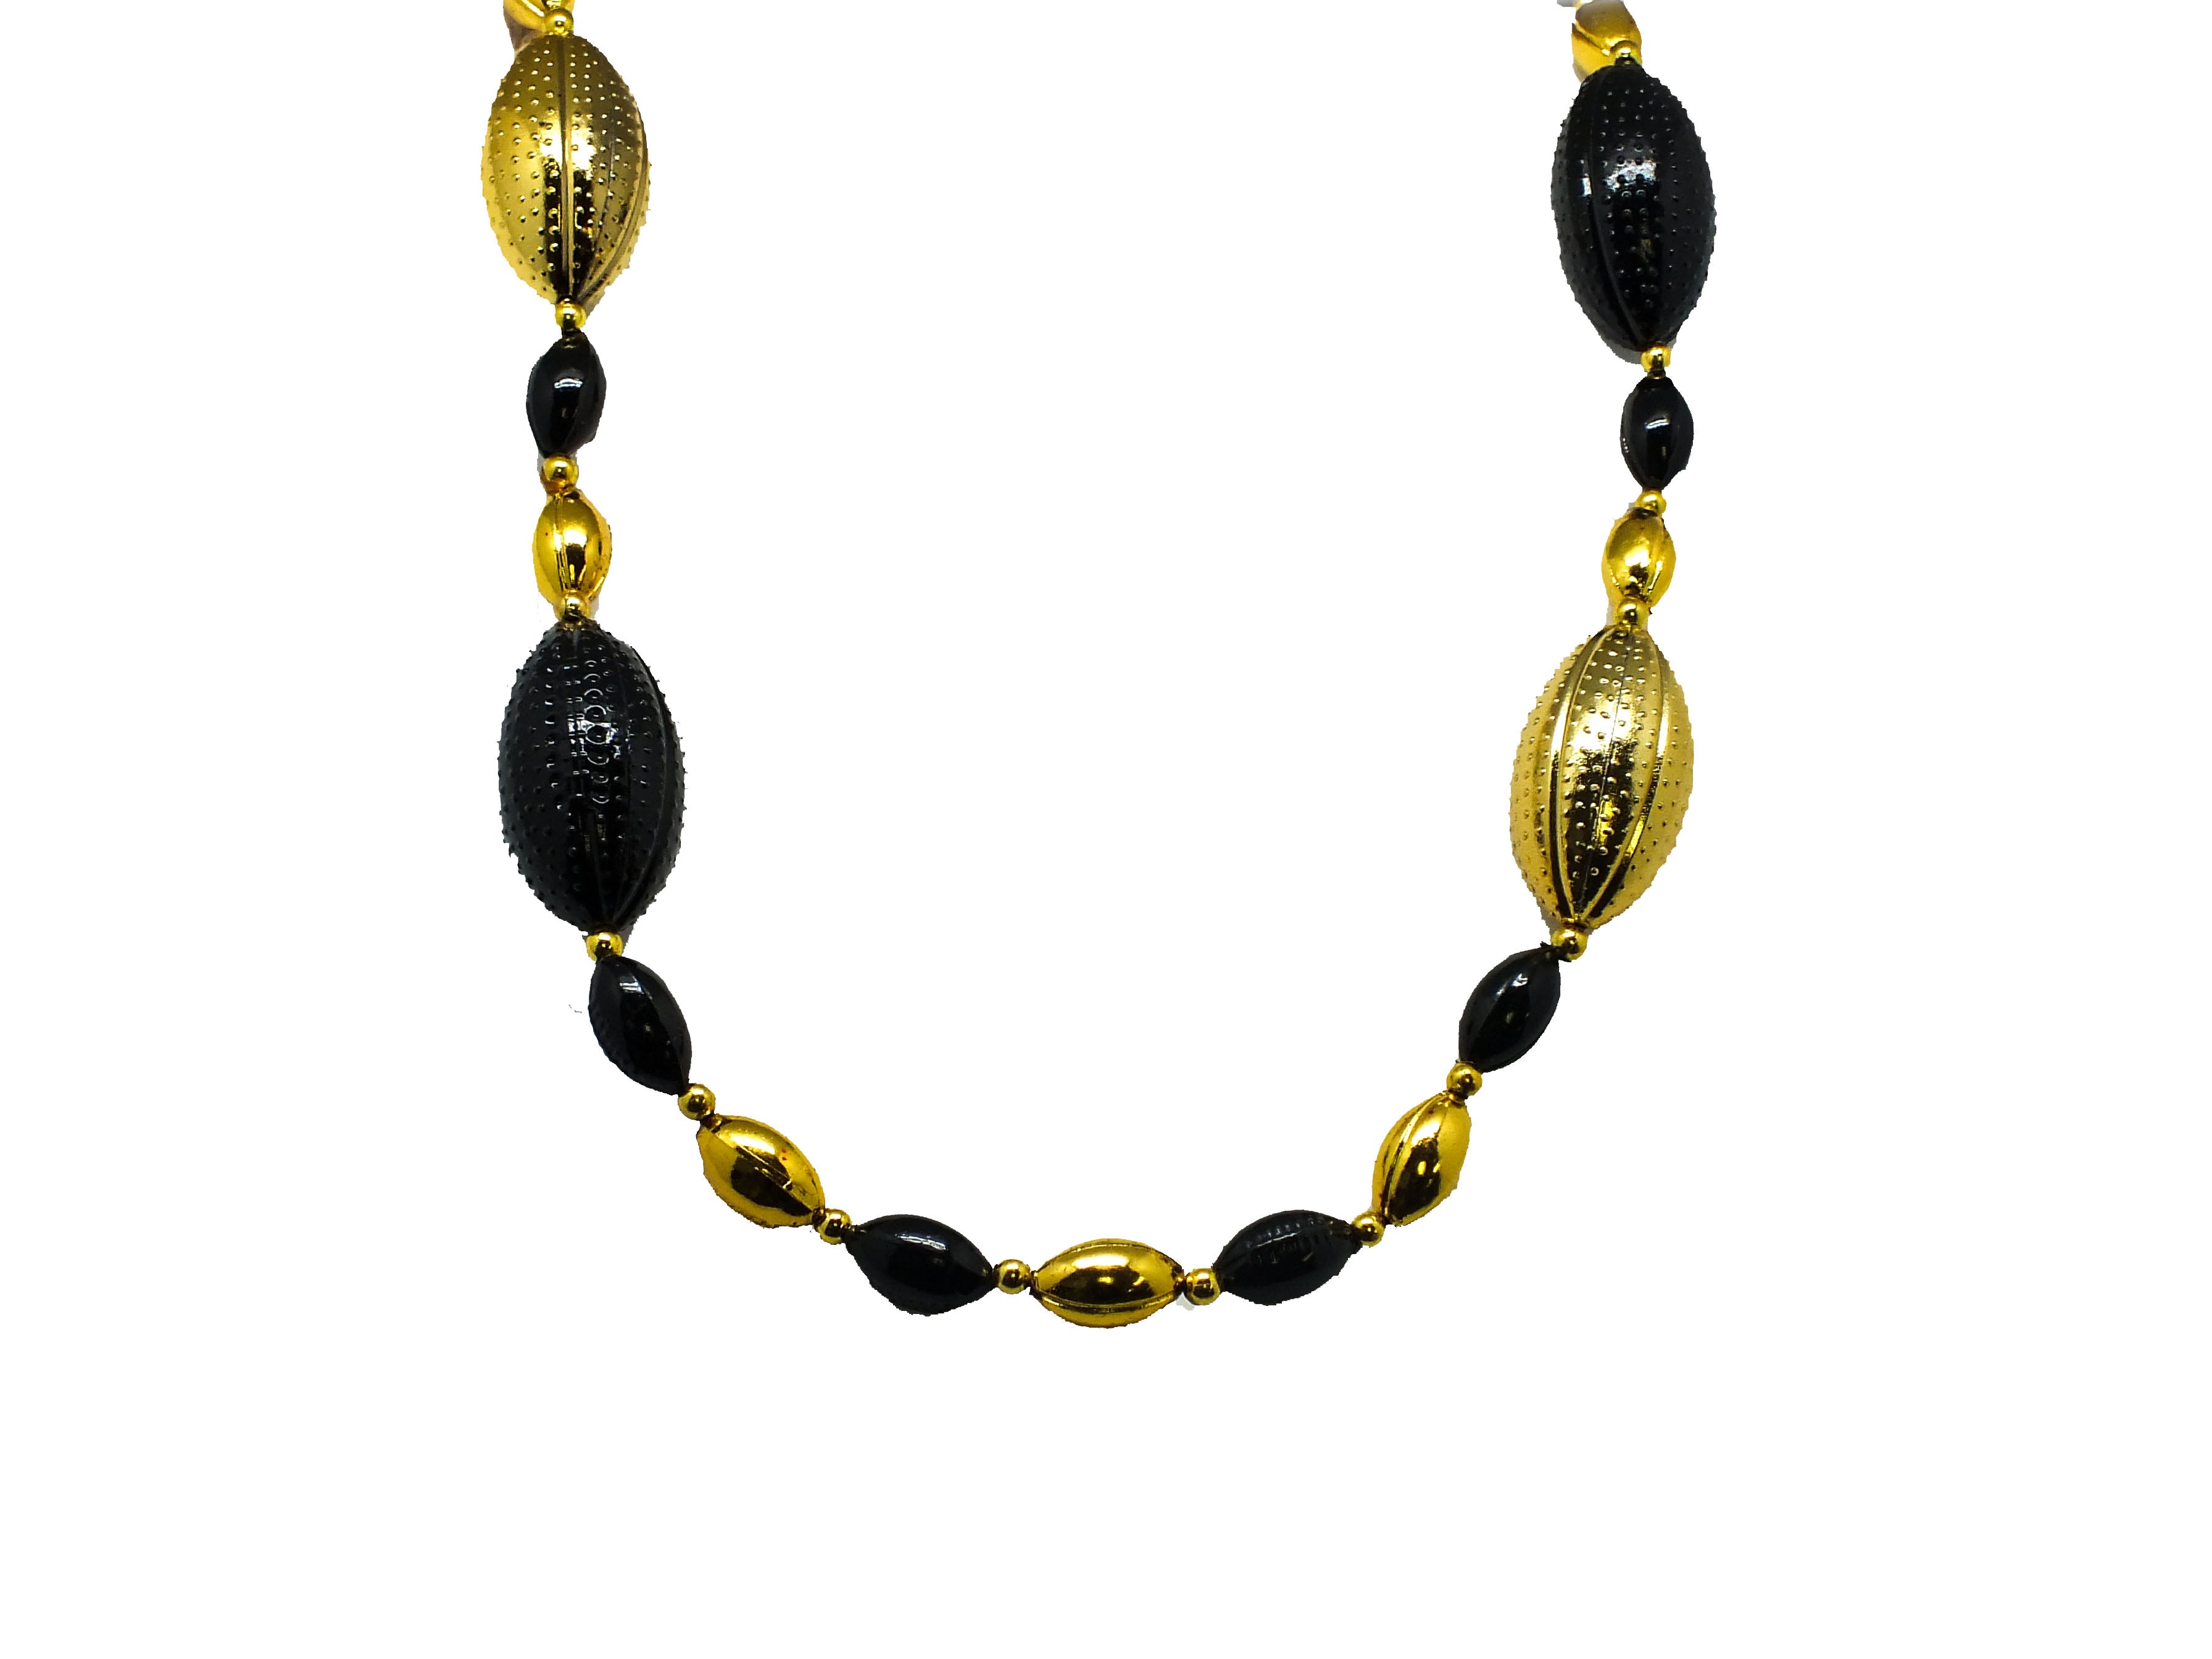 42" Black and Gold Football Bead